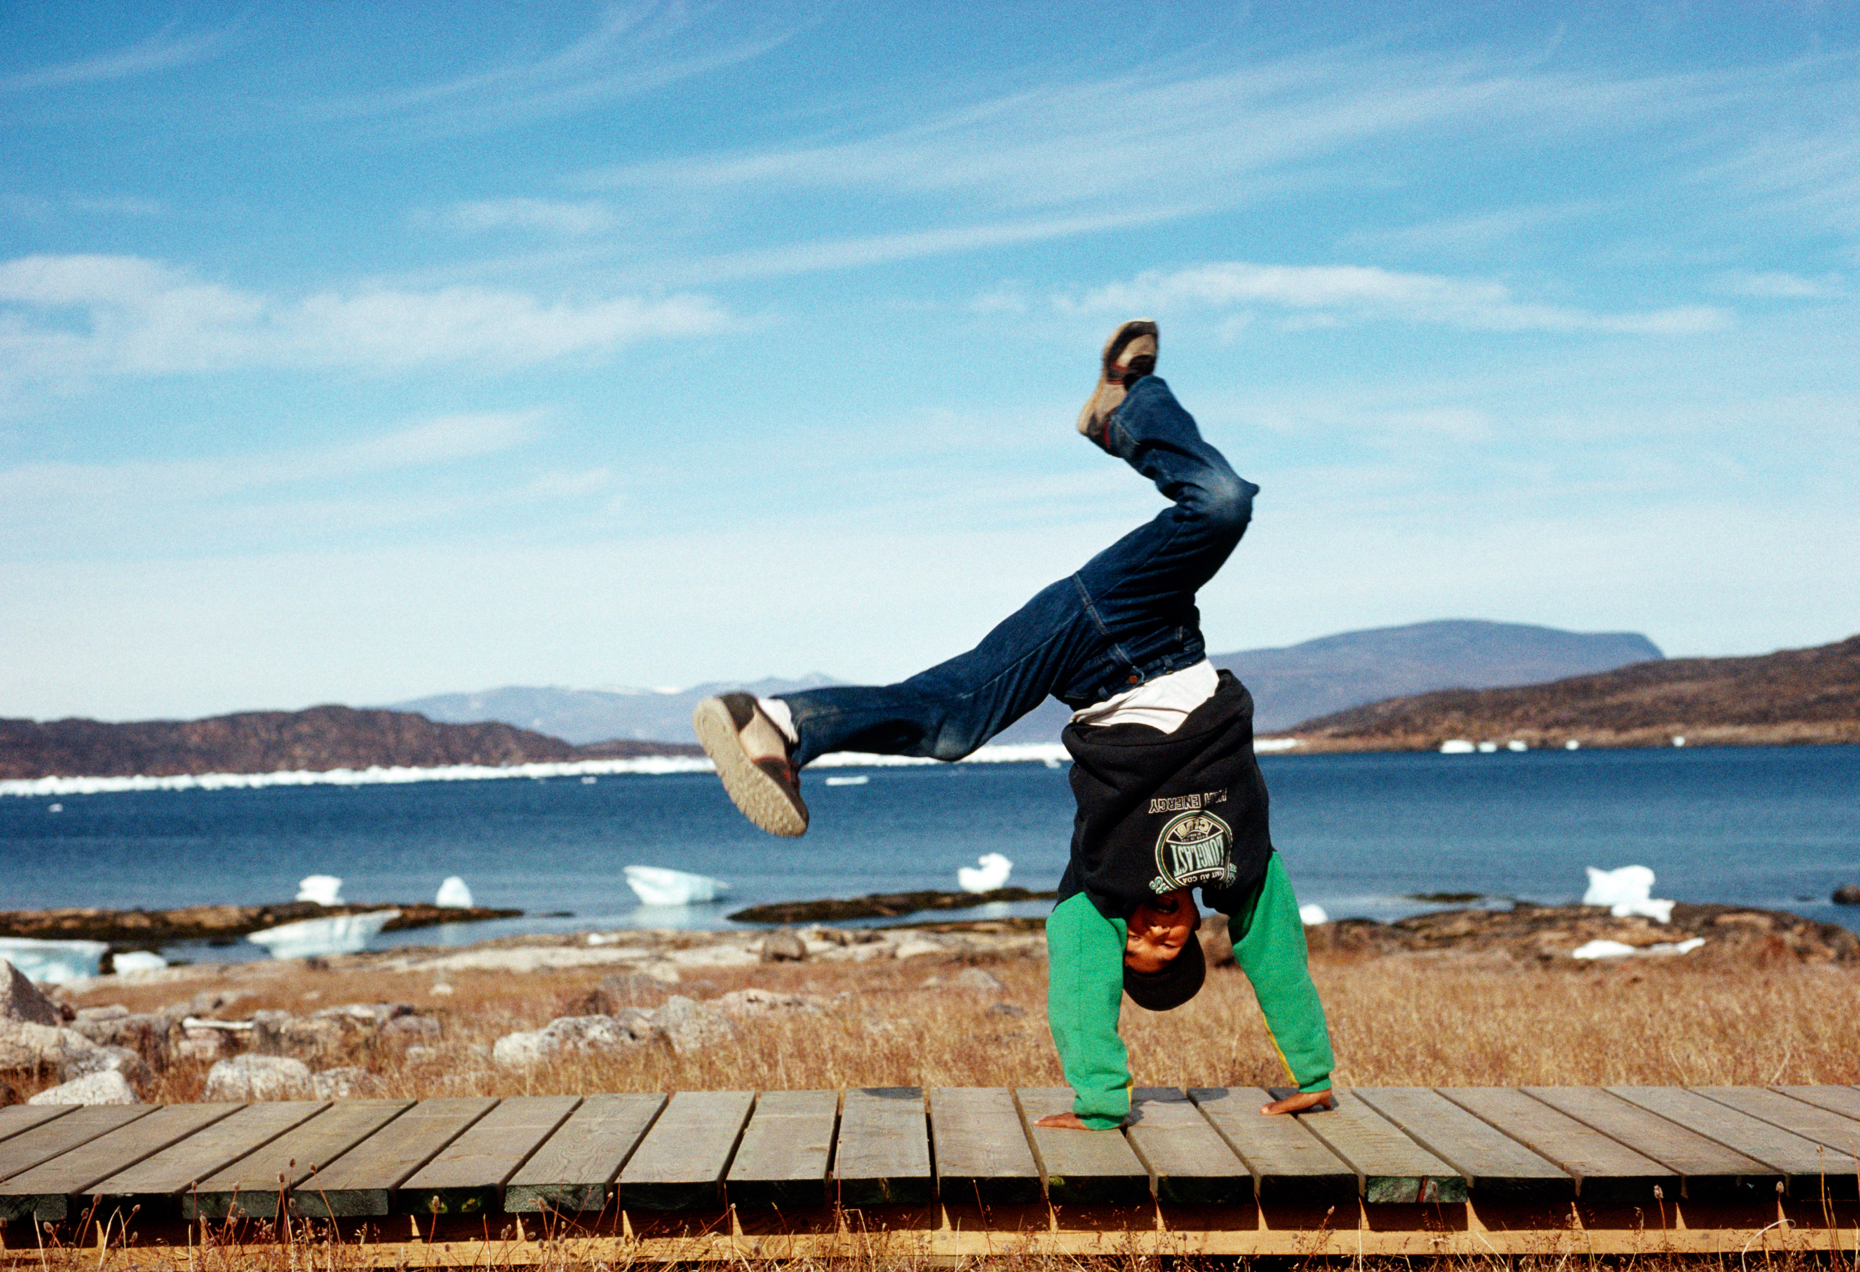 Young Inuit boy does a cartwheel on the boardwalk at historic Ke